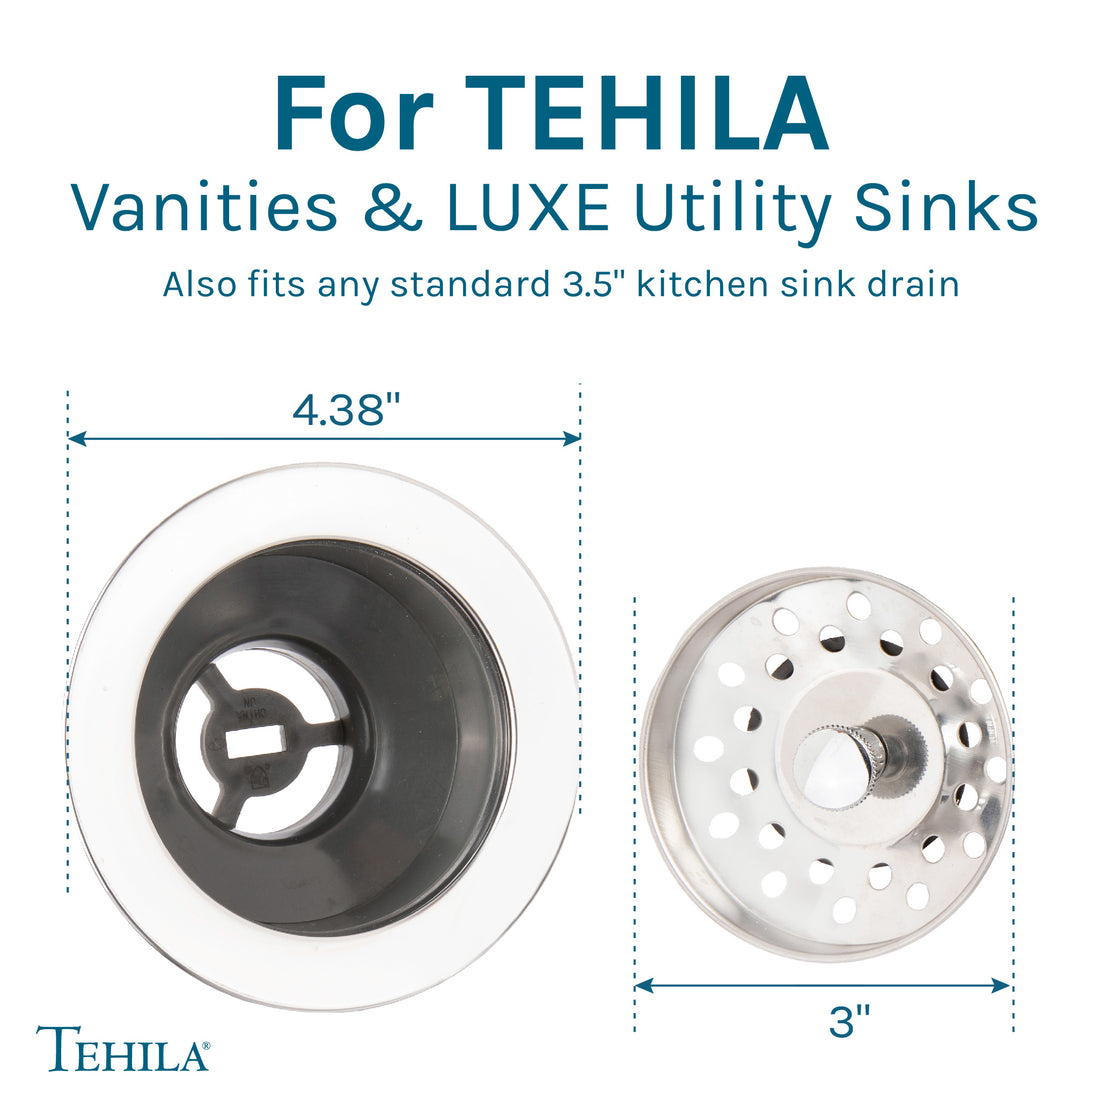 For Tehila Vanities & Luxe Utility Sinks Also fits any standard 3.5" kitchen sink drain